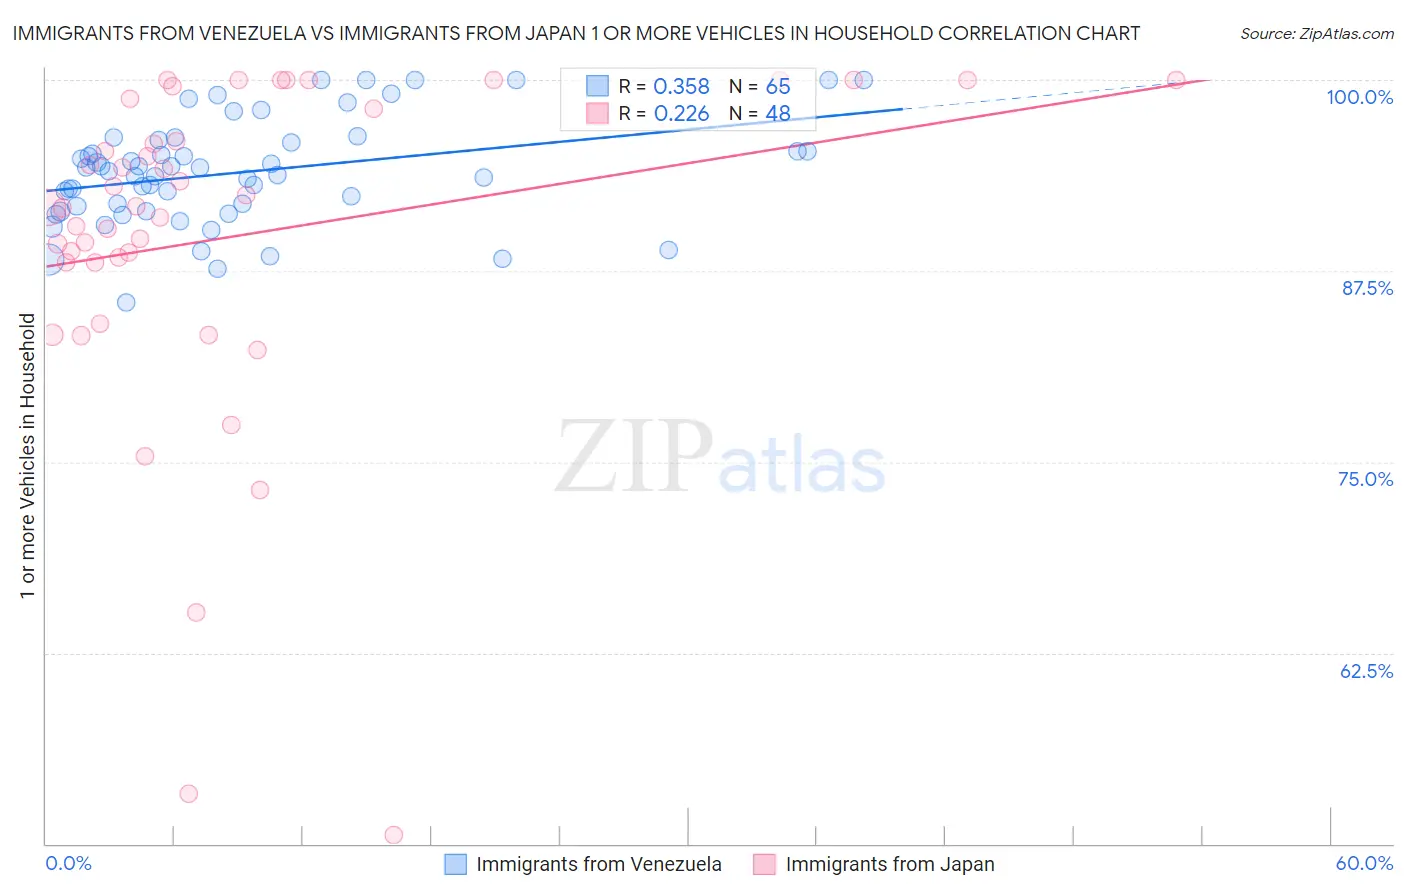 Immigrants from Venezuela vs Immigrants from Japan 1 or more Vehicles in Household